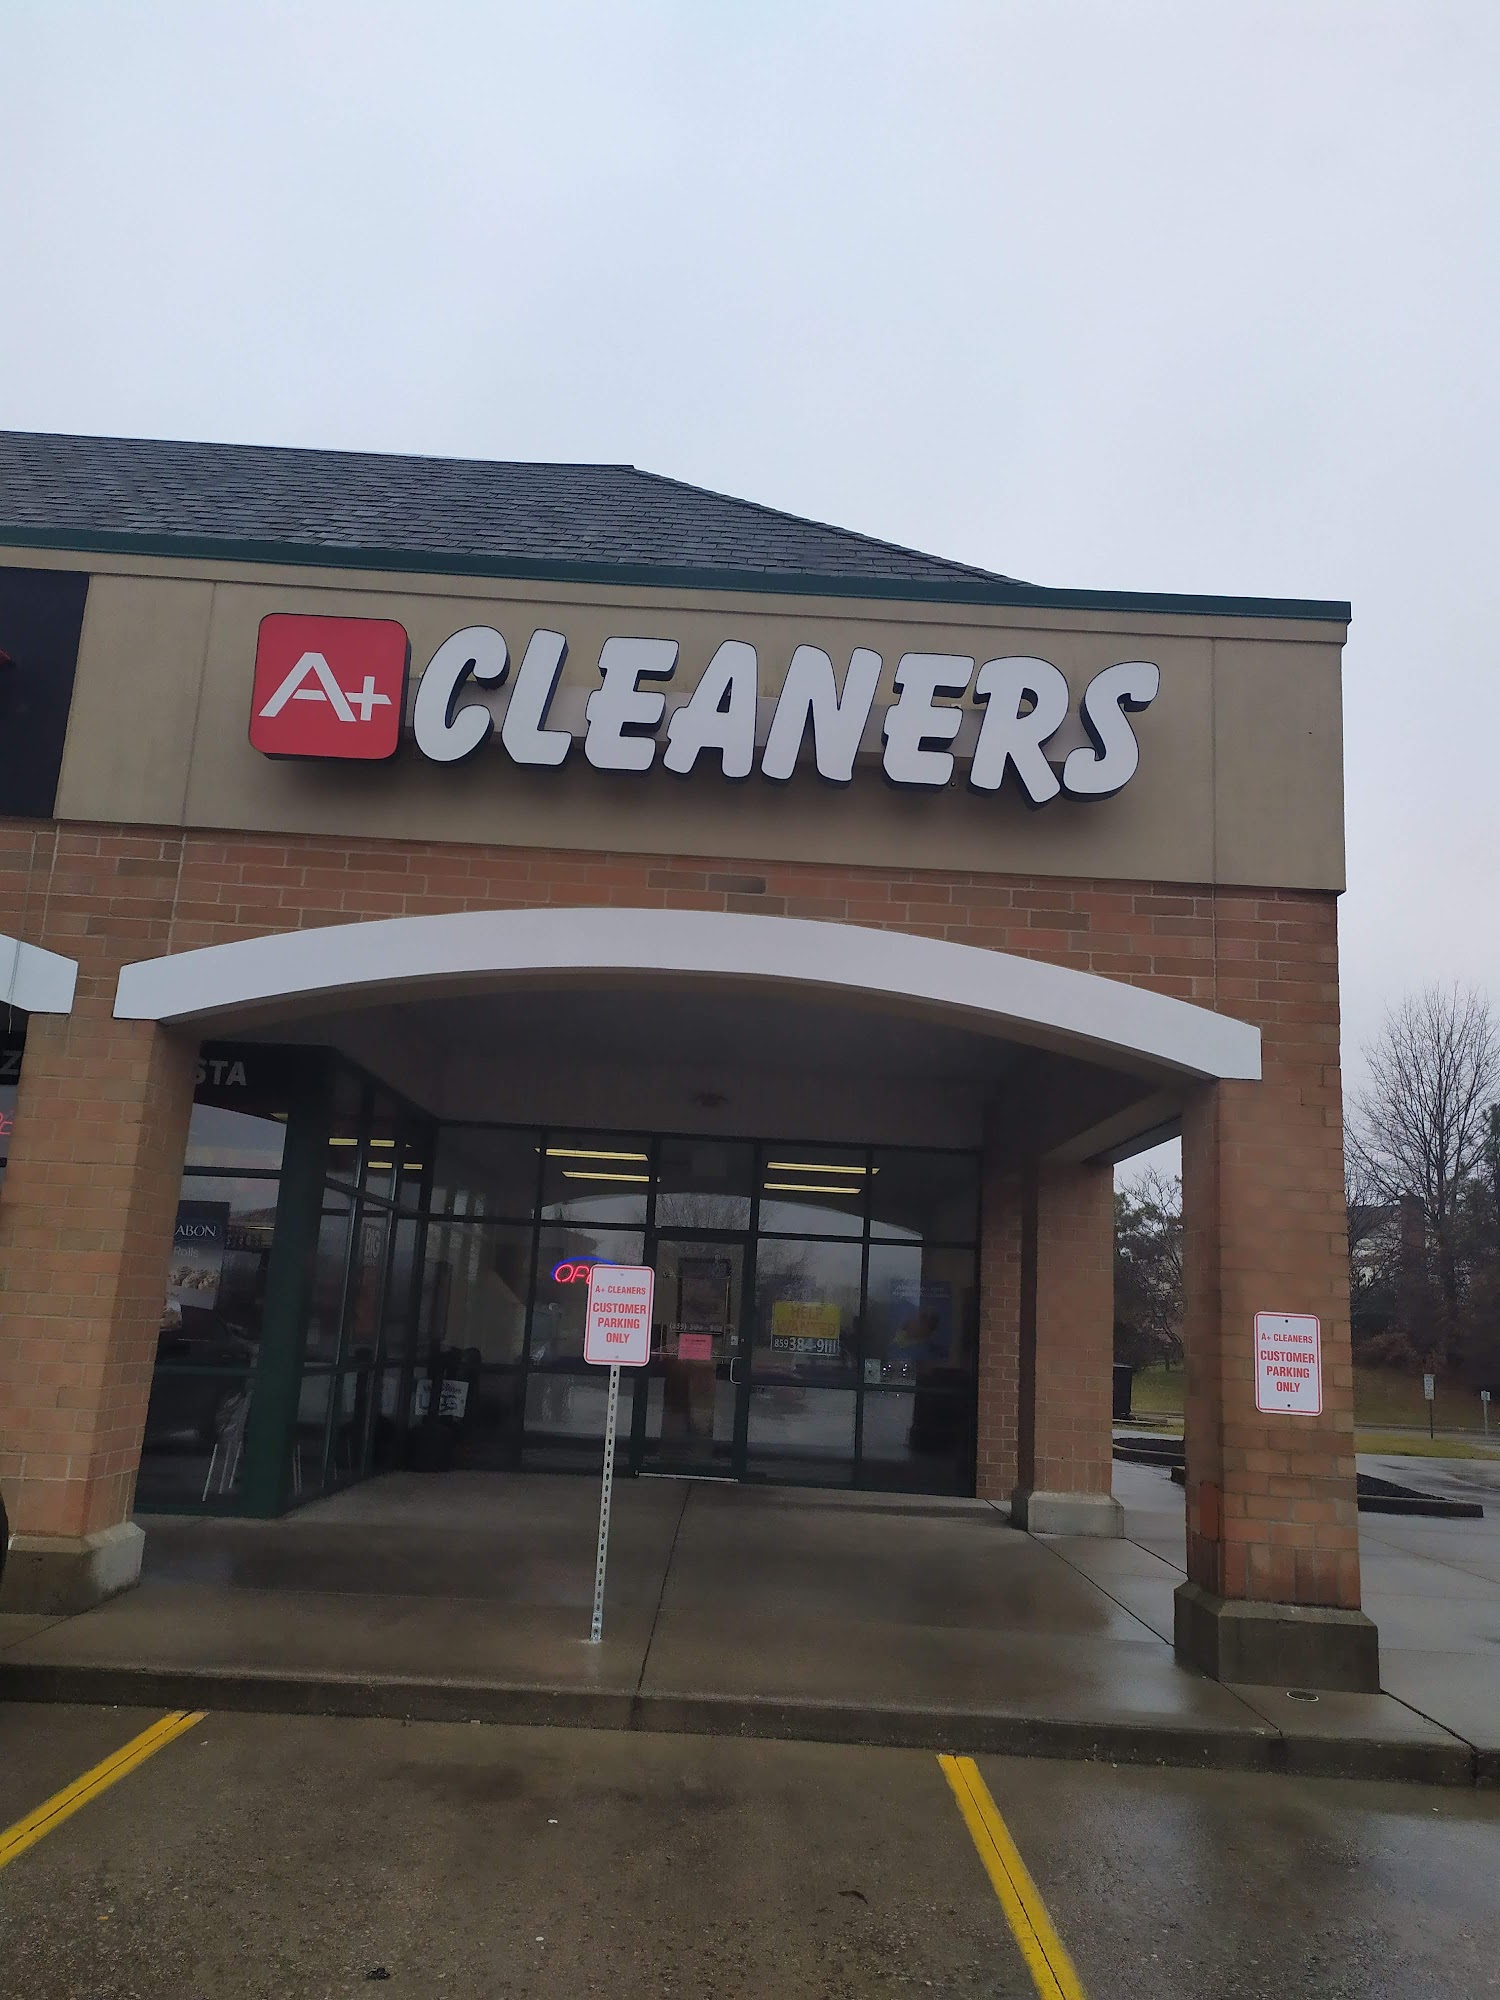 A+ Cleaners 8761 Old US Hwy 42 J, Union Kentucky 41091